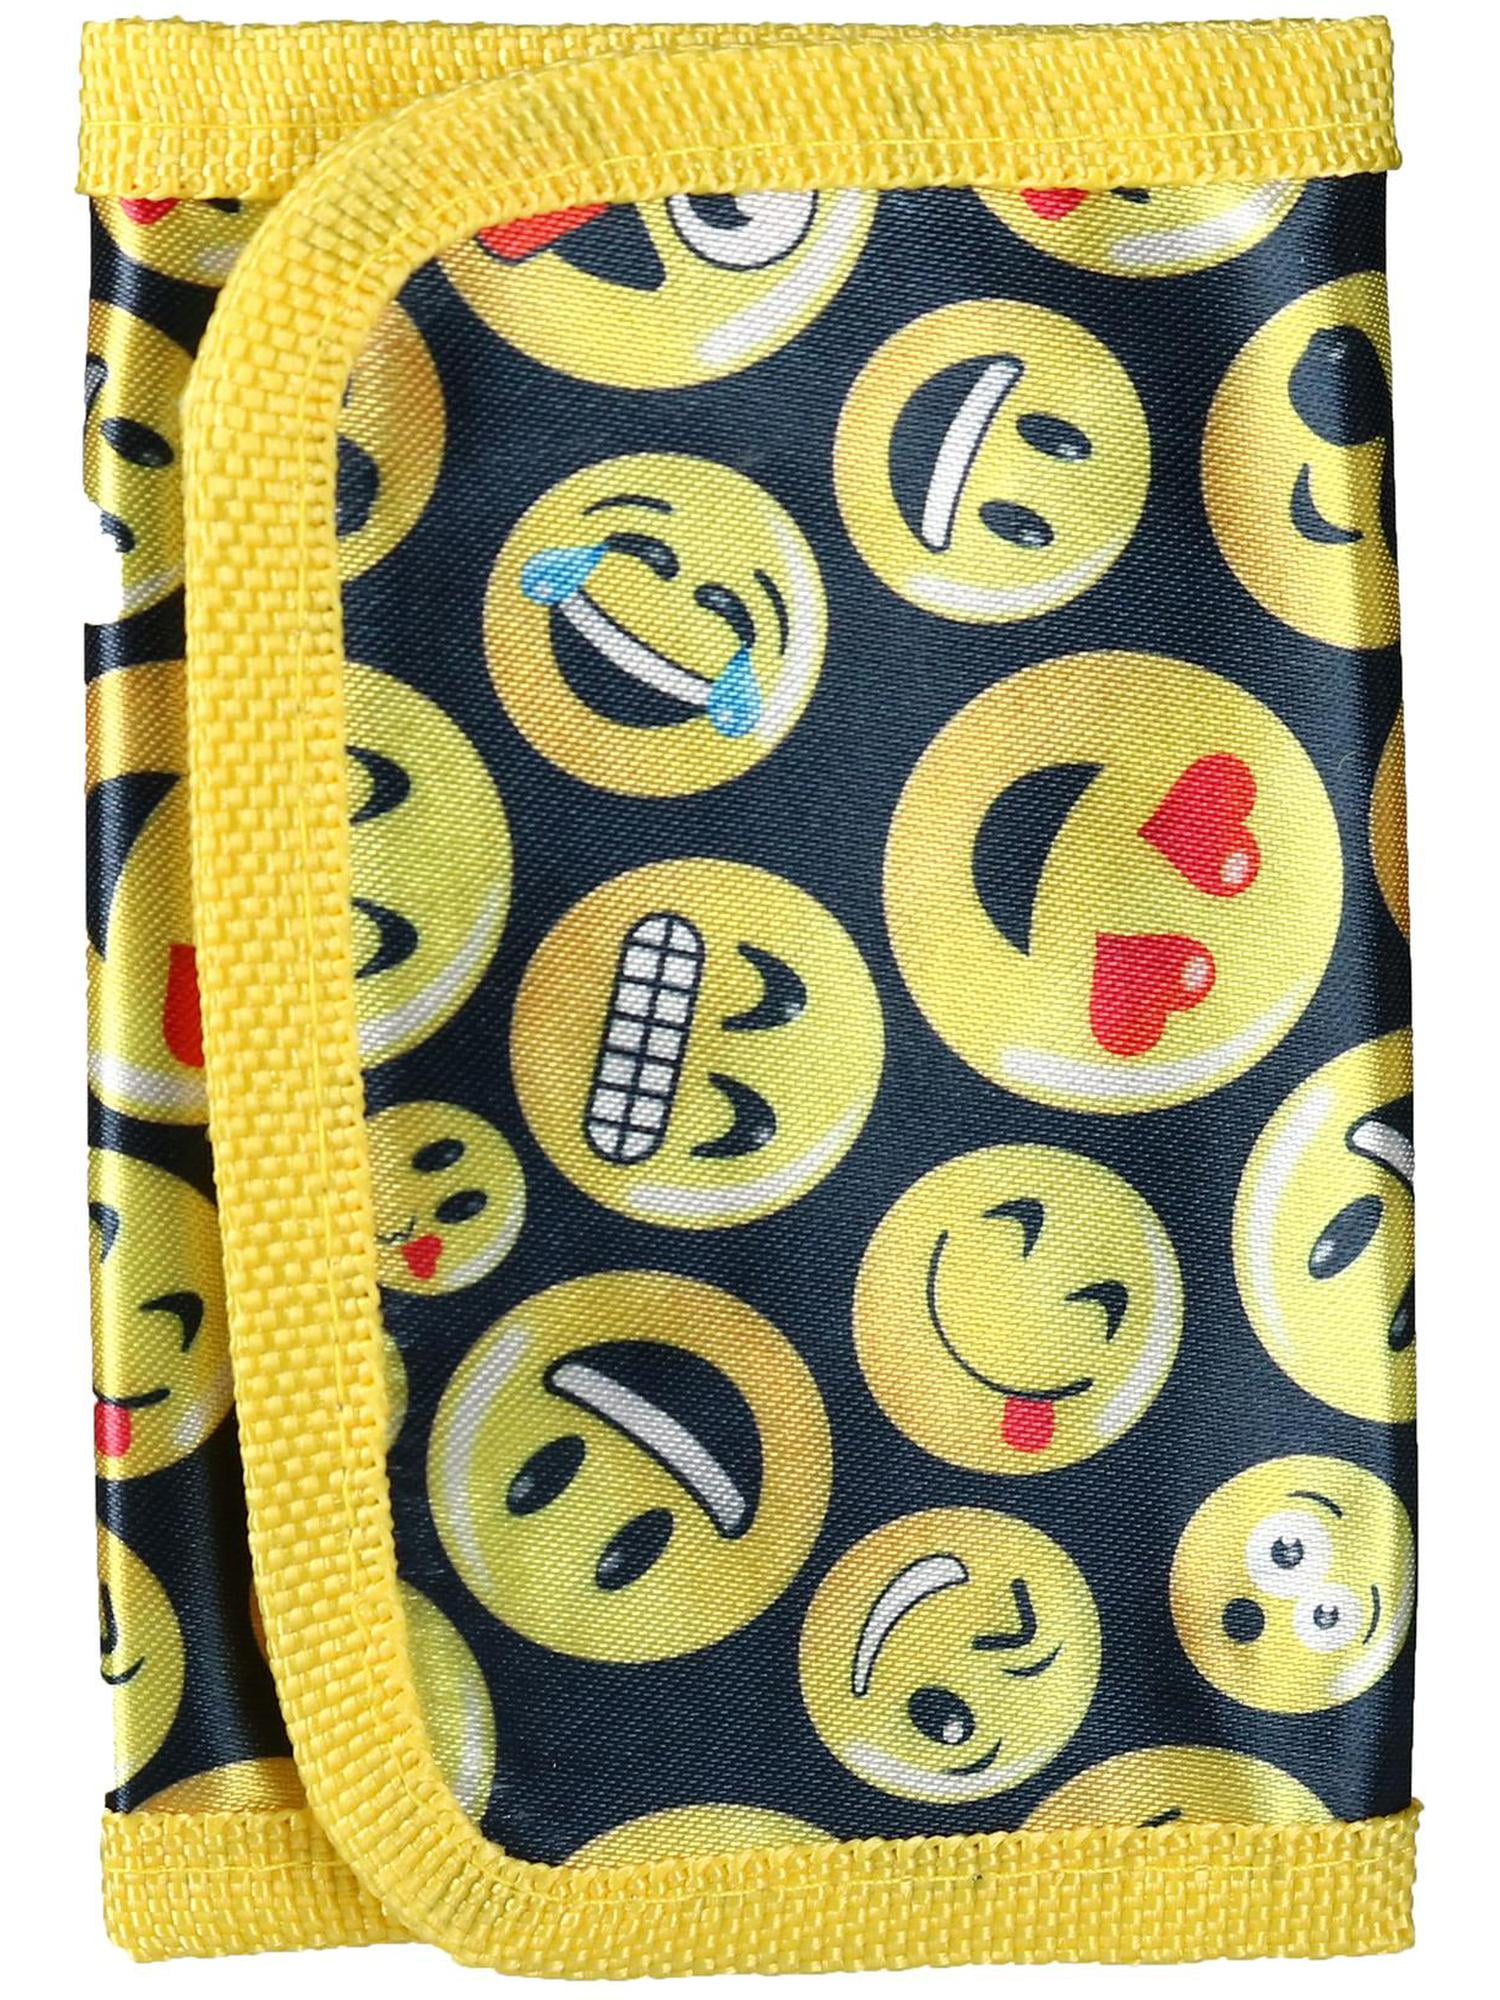 SMILEY FACE EMOJI WORLD LOVE BLACK ZIP WALLET NEW WITH TAGS 